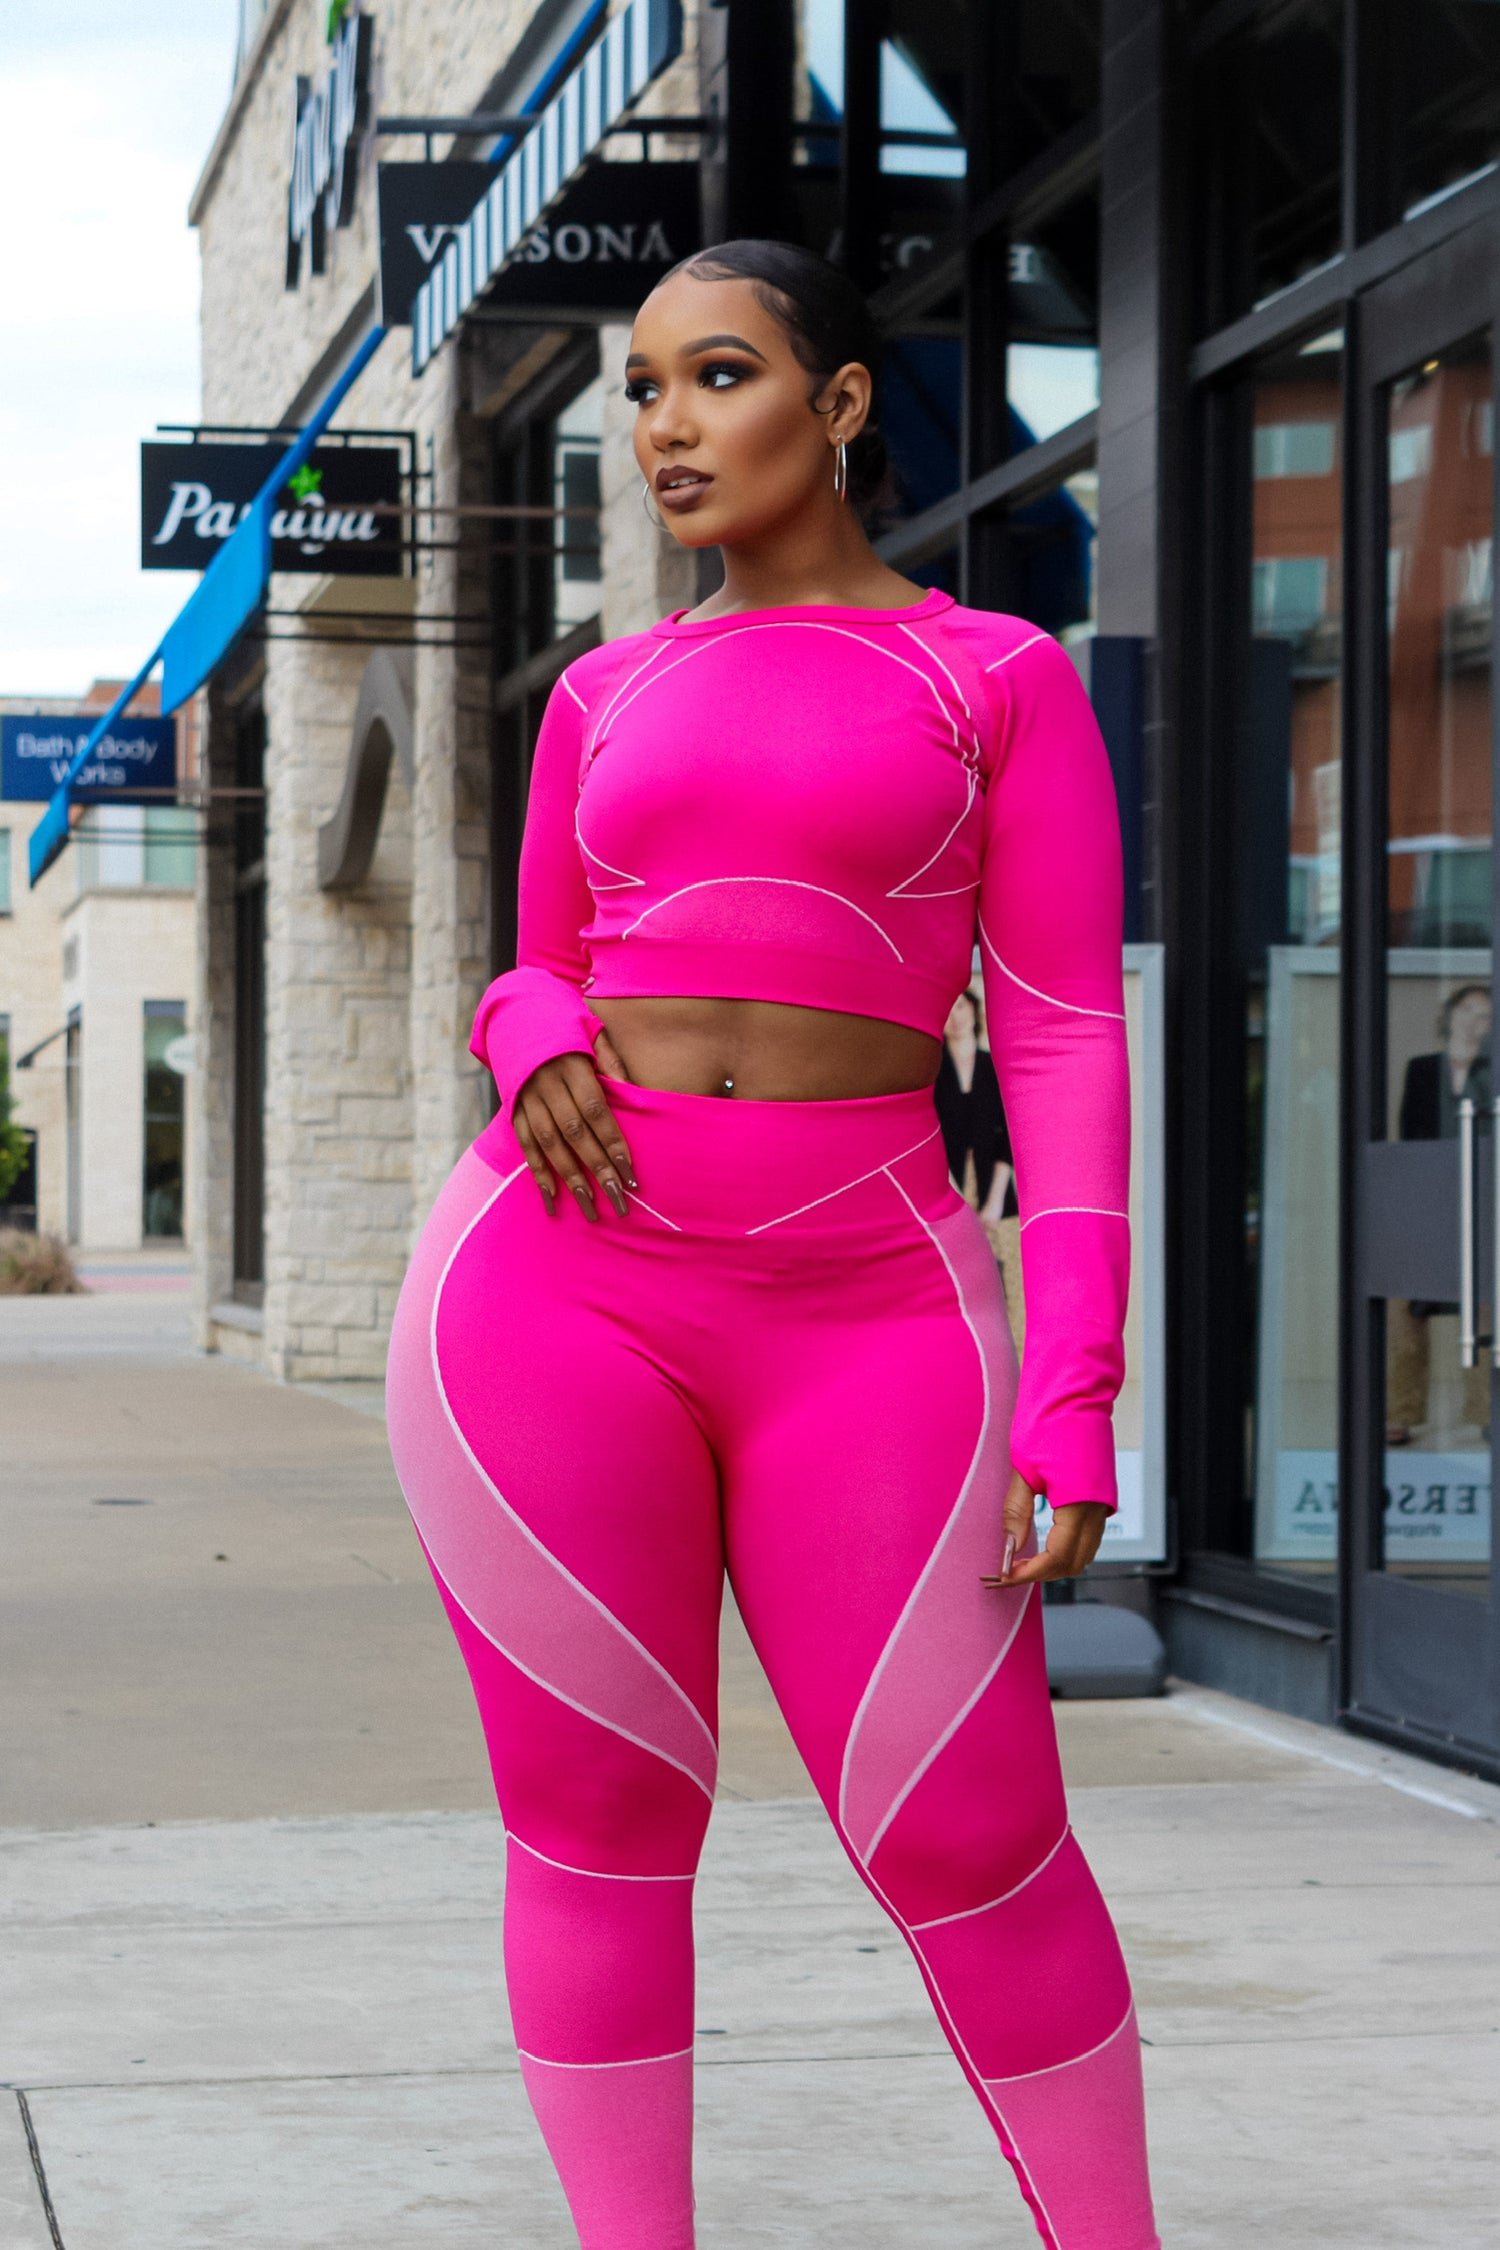 woman in pink fitness gym wear